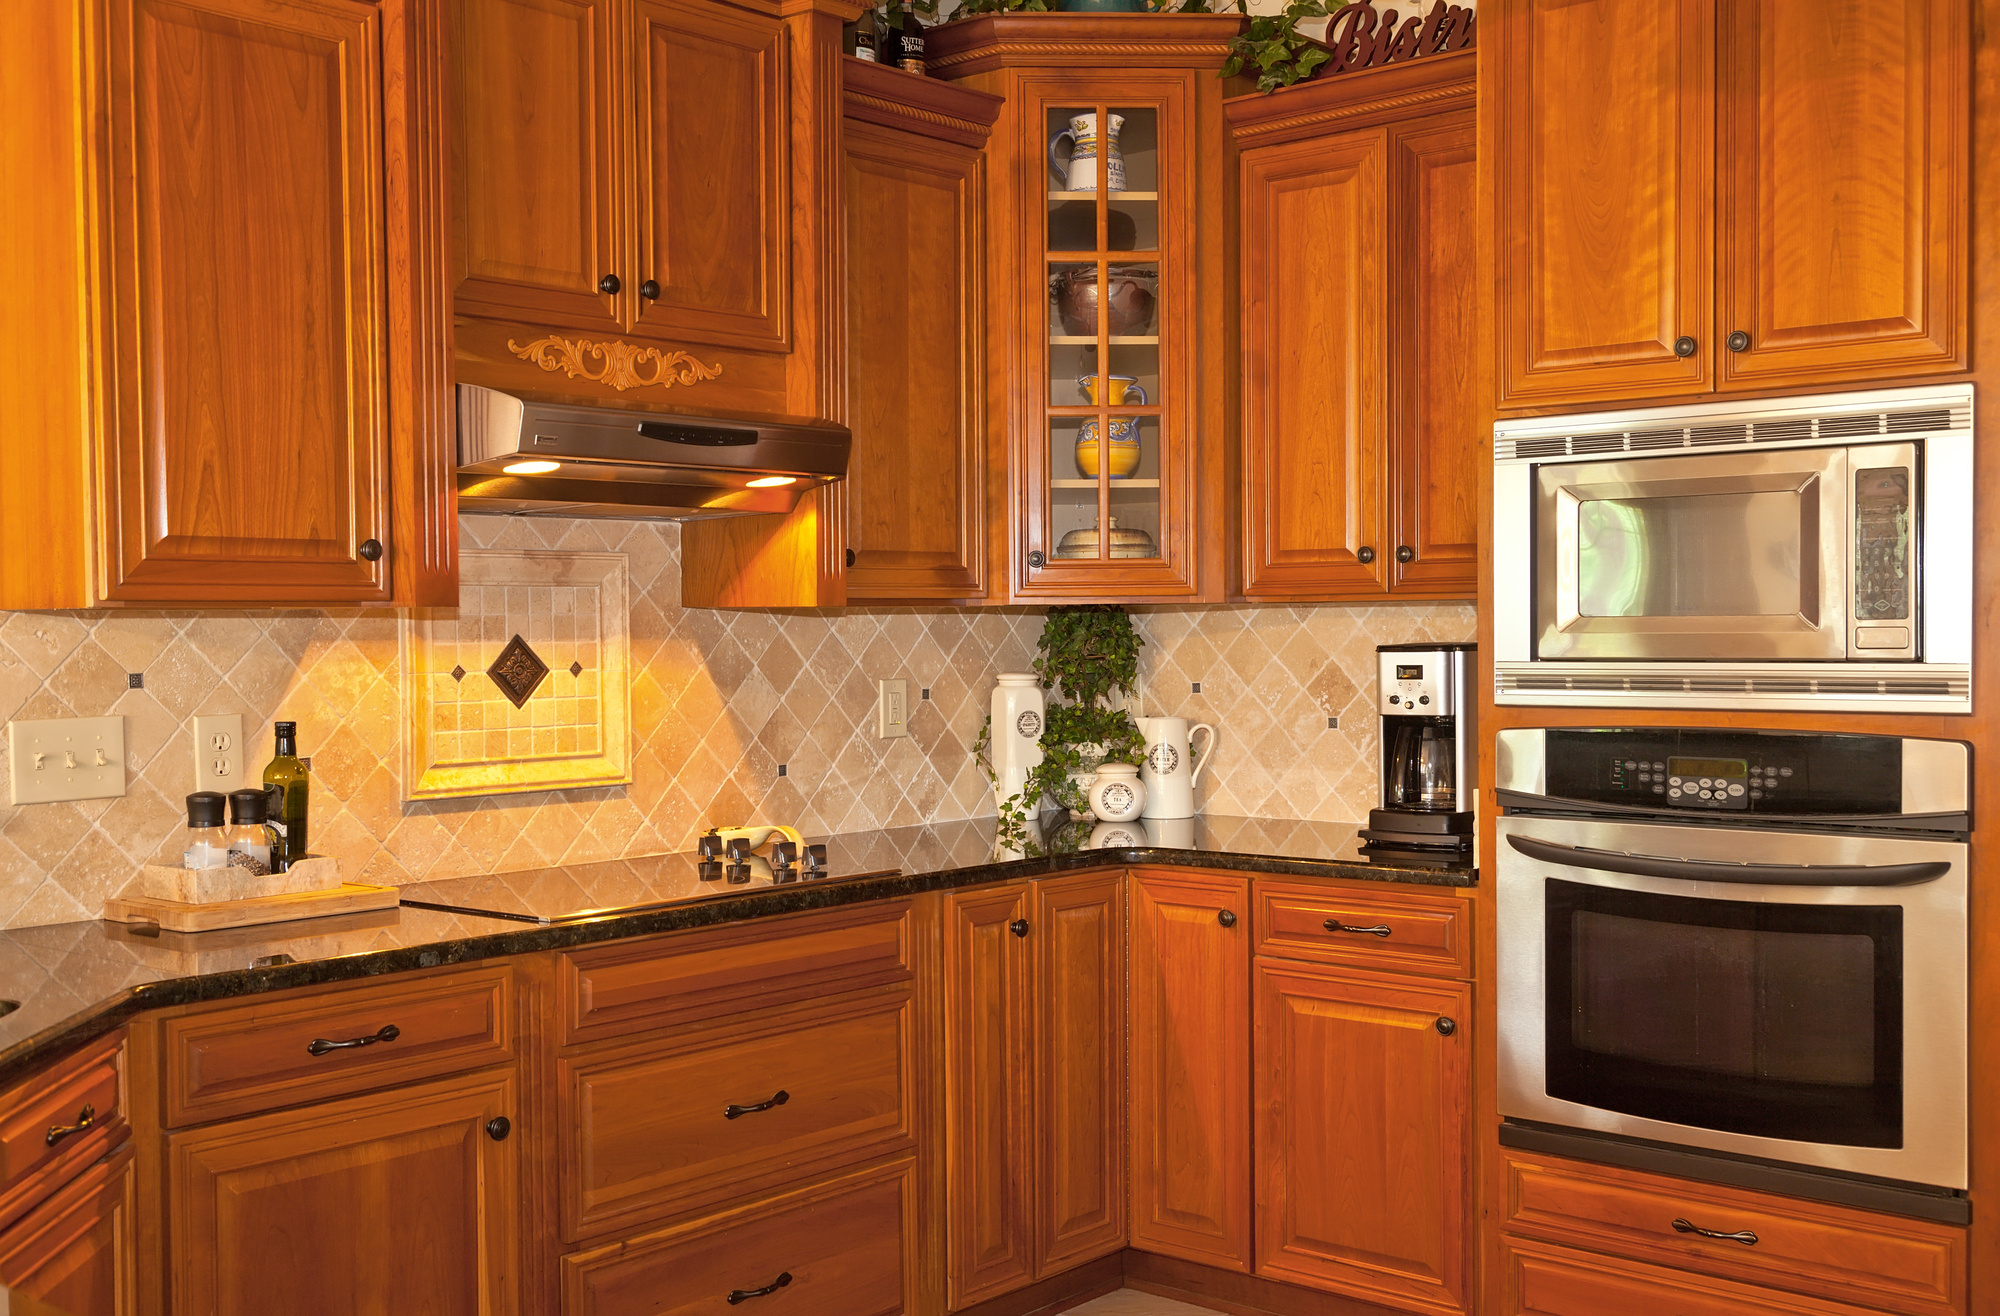 Kitchen Cabinet Dimensions Your Guide To The Standard Sizes intended for size 2000 X 1316